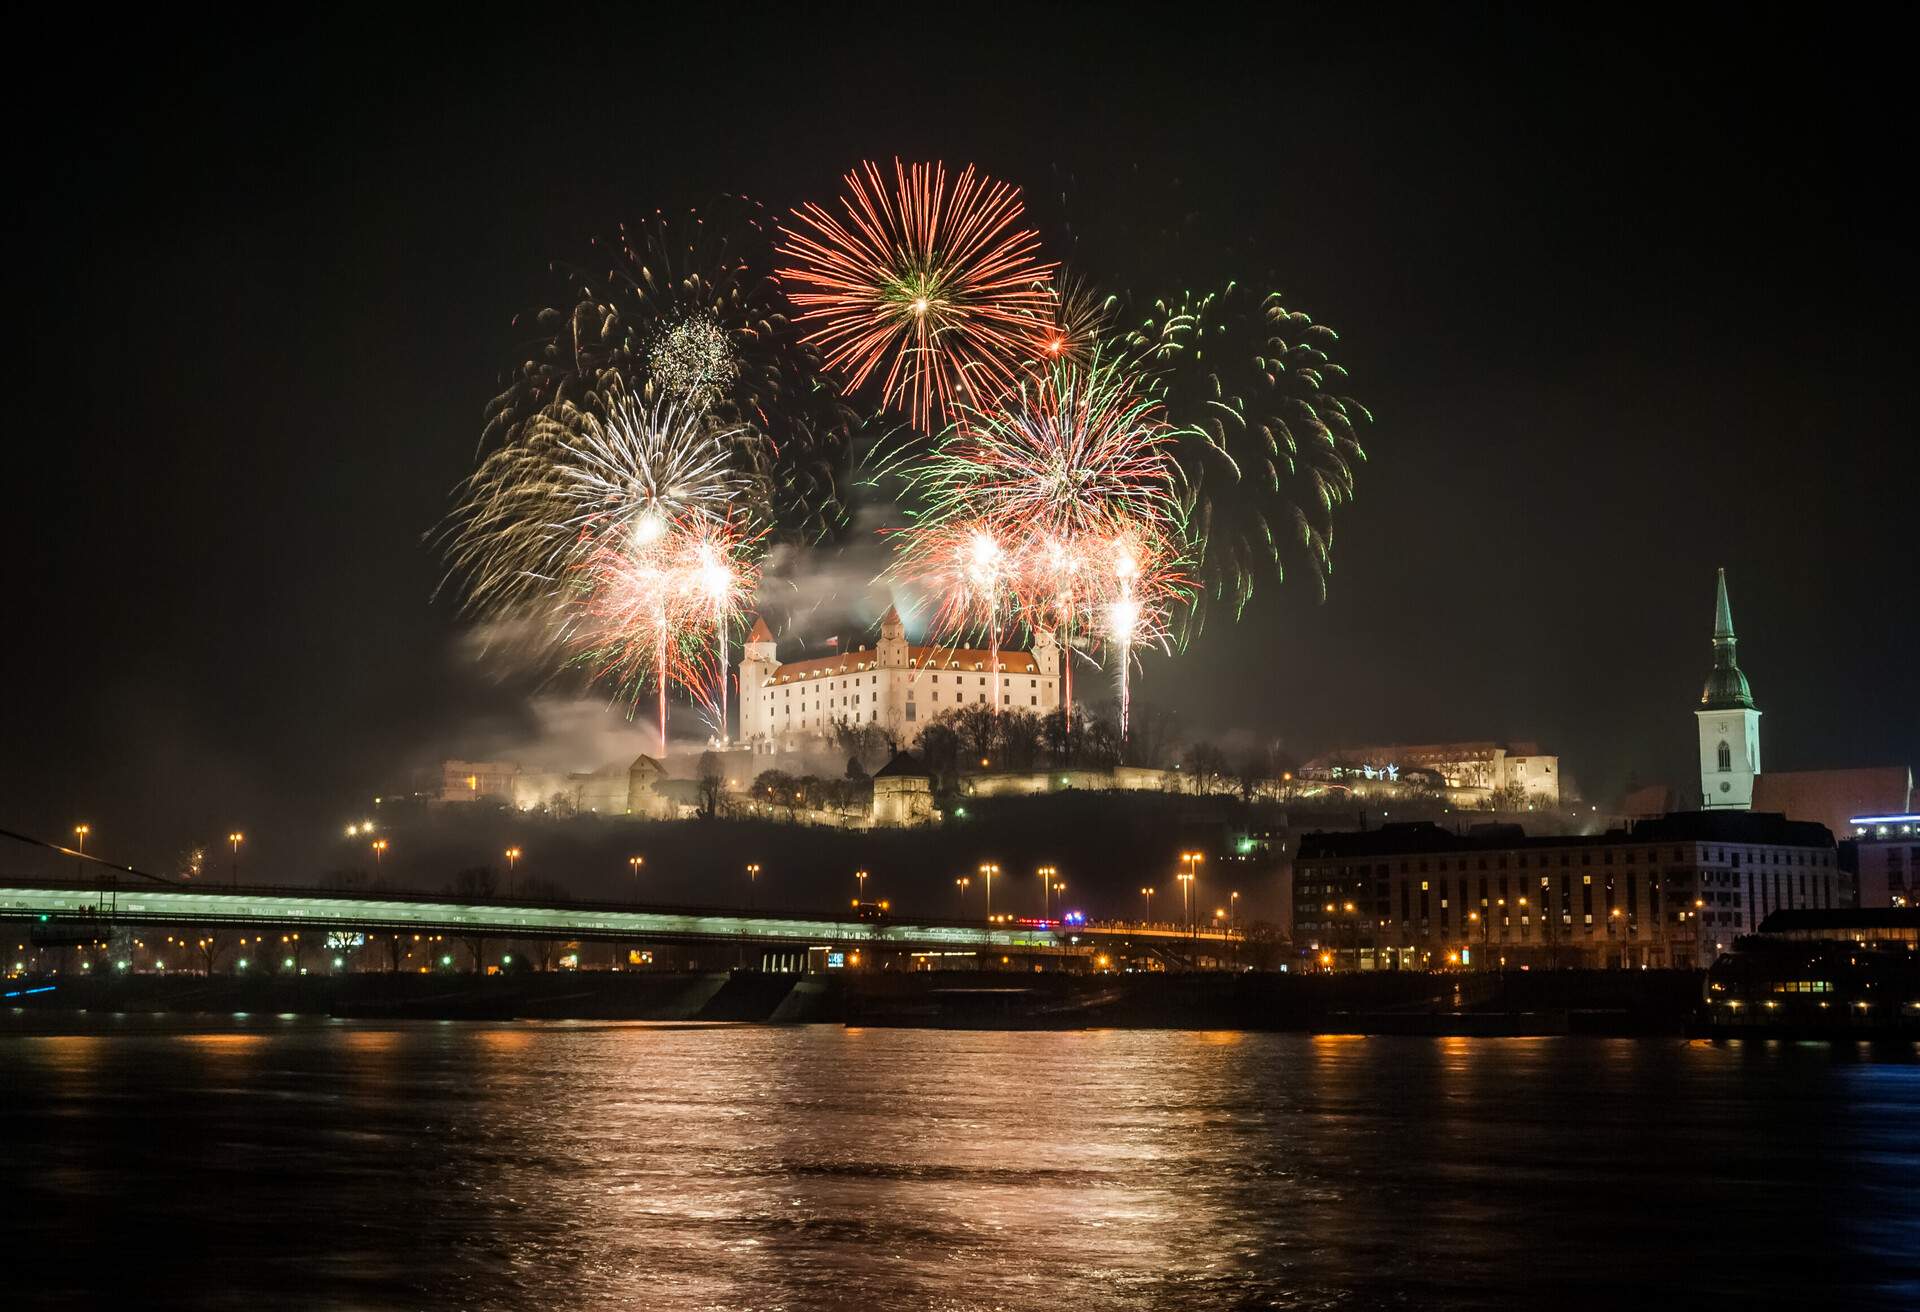 Bright fireworks across the river offer a magnificent show against the urban backdrop as they illuminate Bratislava Castle's outline.